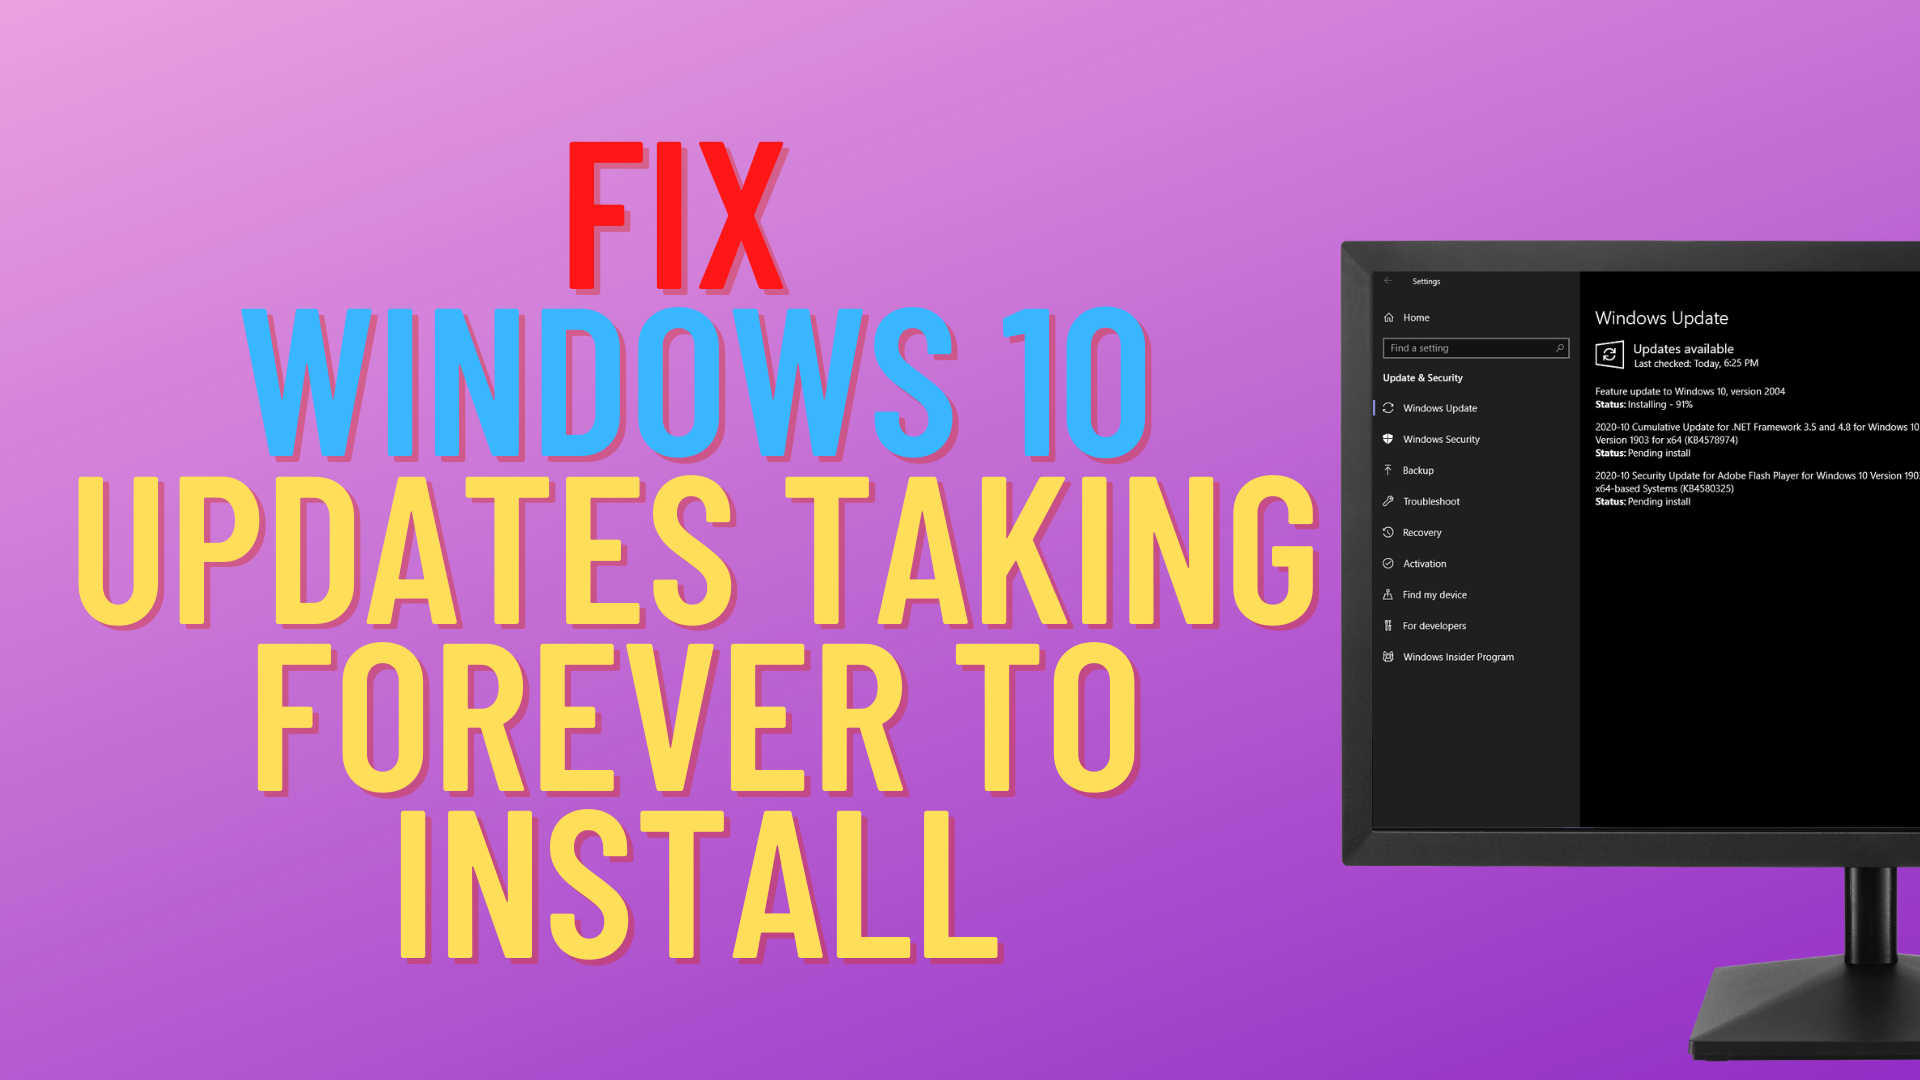 How to Fix Windows 10 Updates Taking Forever to Install